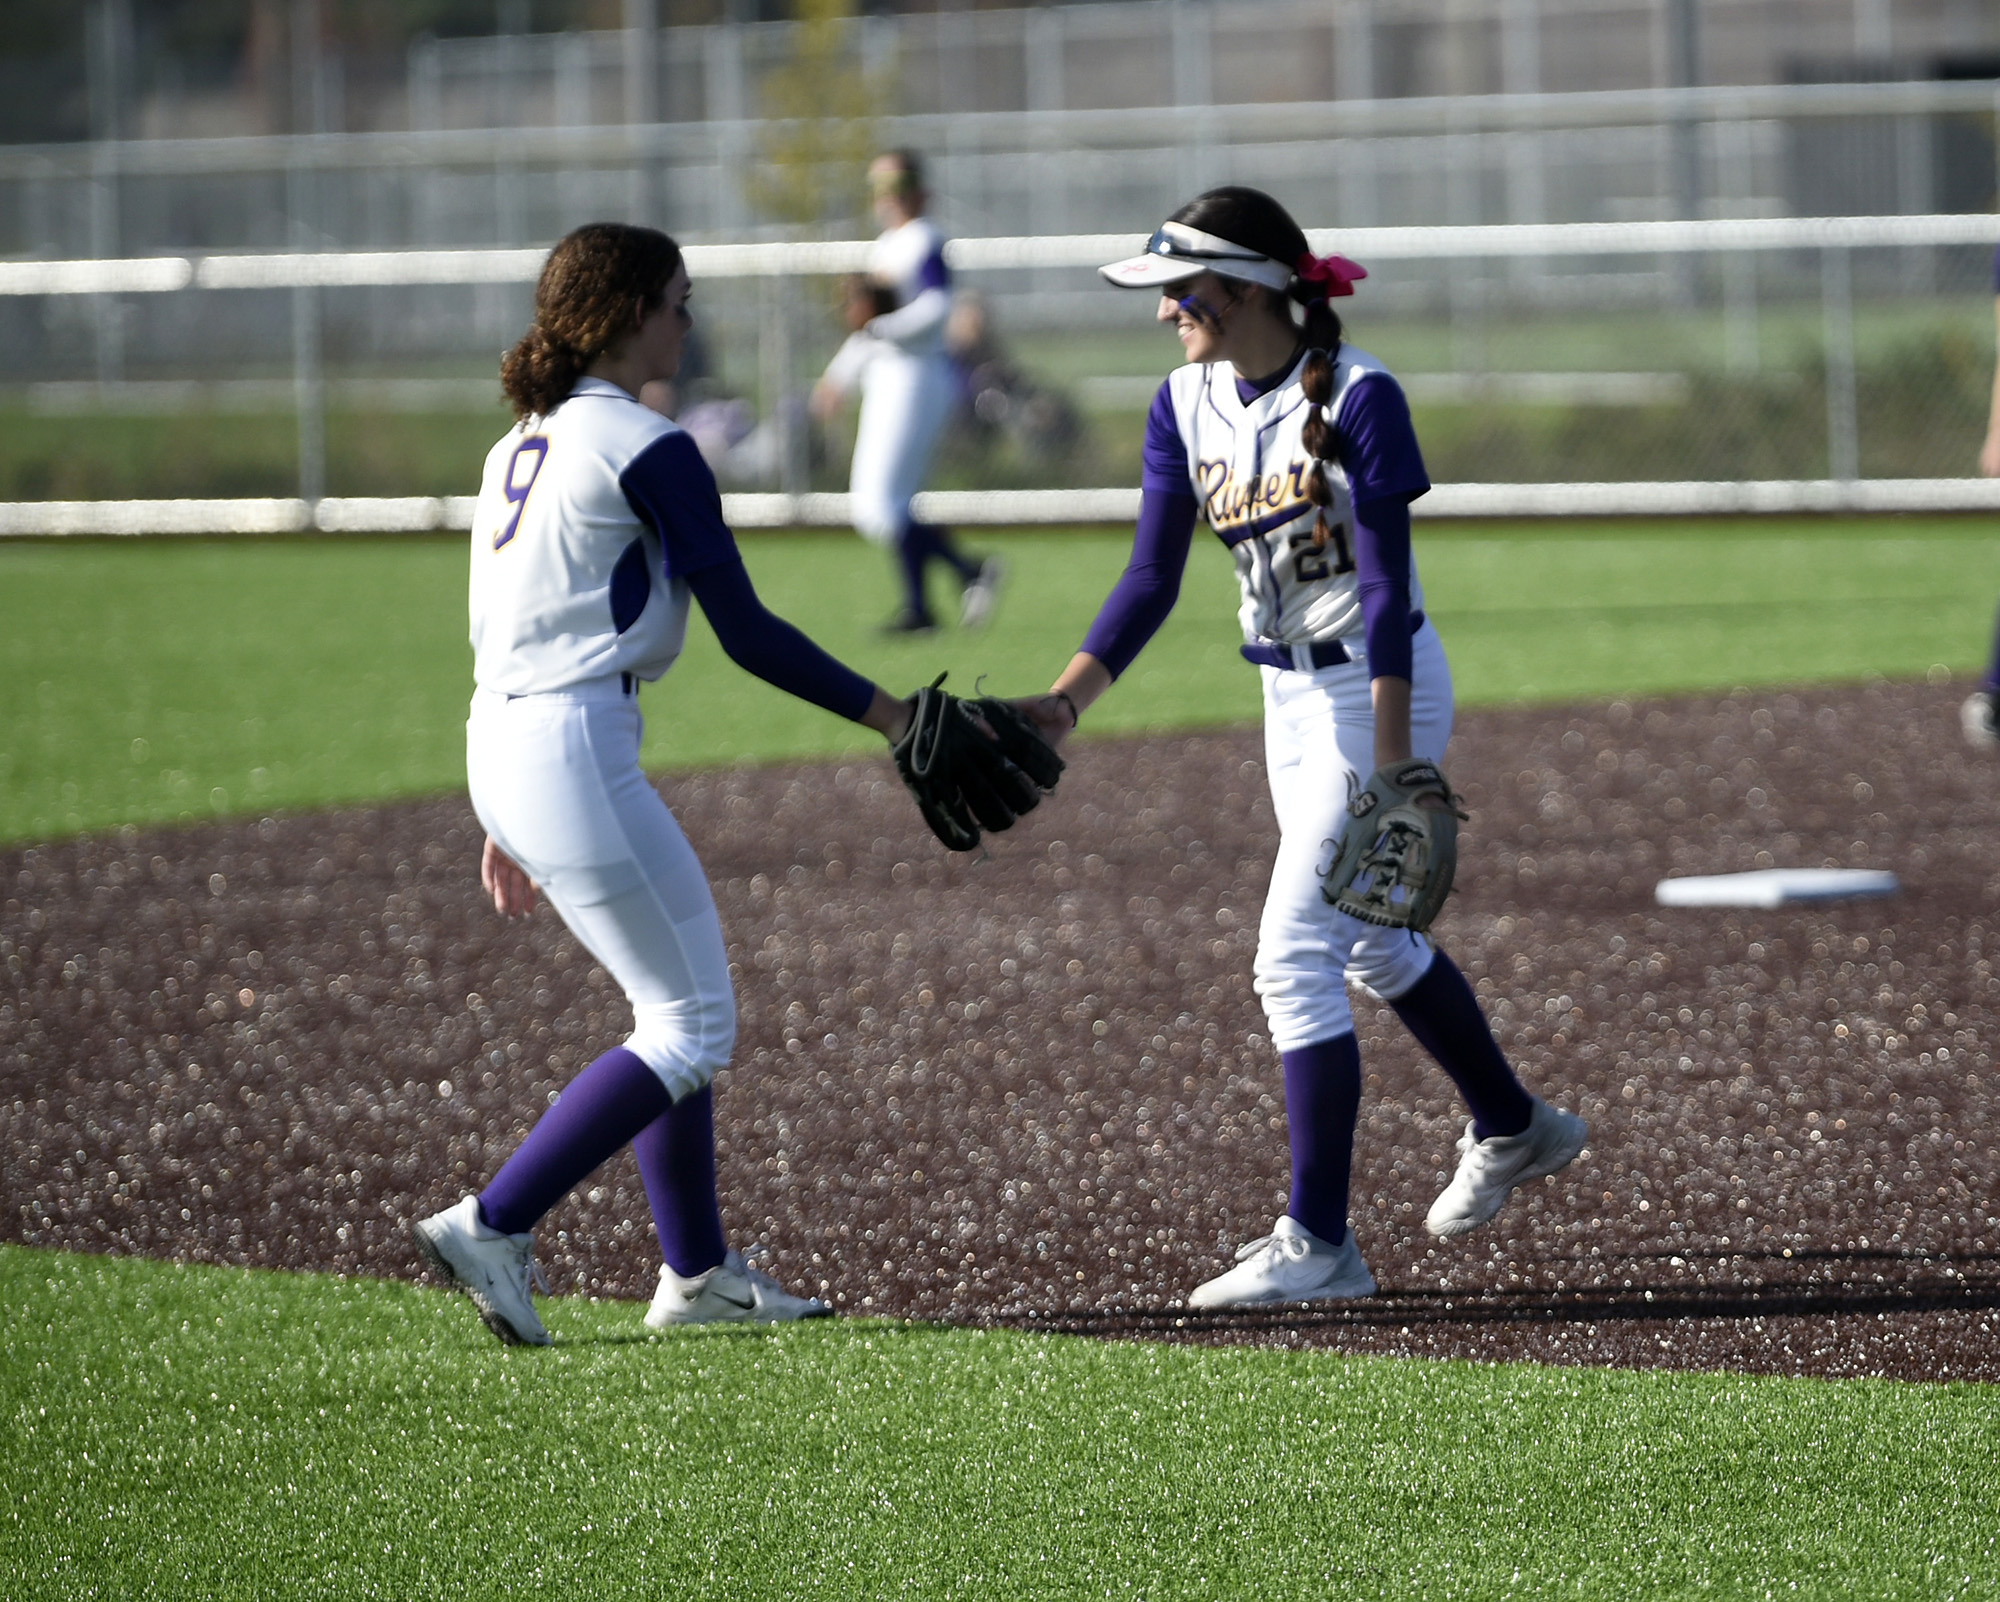 Columbia River shortstop Mia Yanez (21) is congratulated by outfield Sydney Seibert-Wilder (9) after Yanez made a diving play in the infield against Evergreen in the 3A/2A slowpitch softball district tournament at Heritage High School on Friday, Oct. 20, 2023.